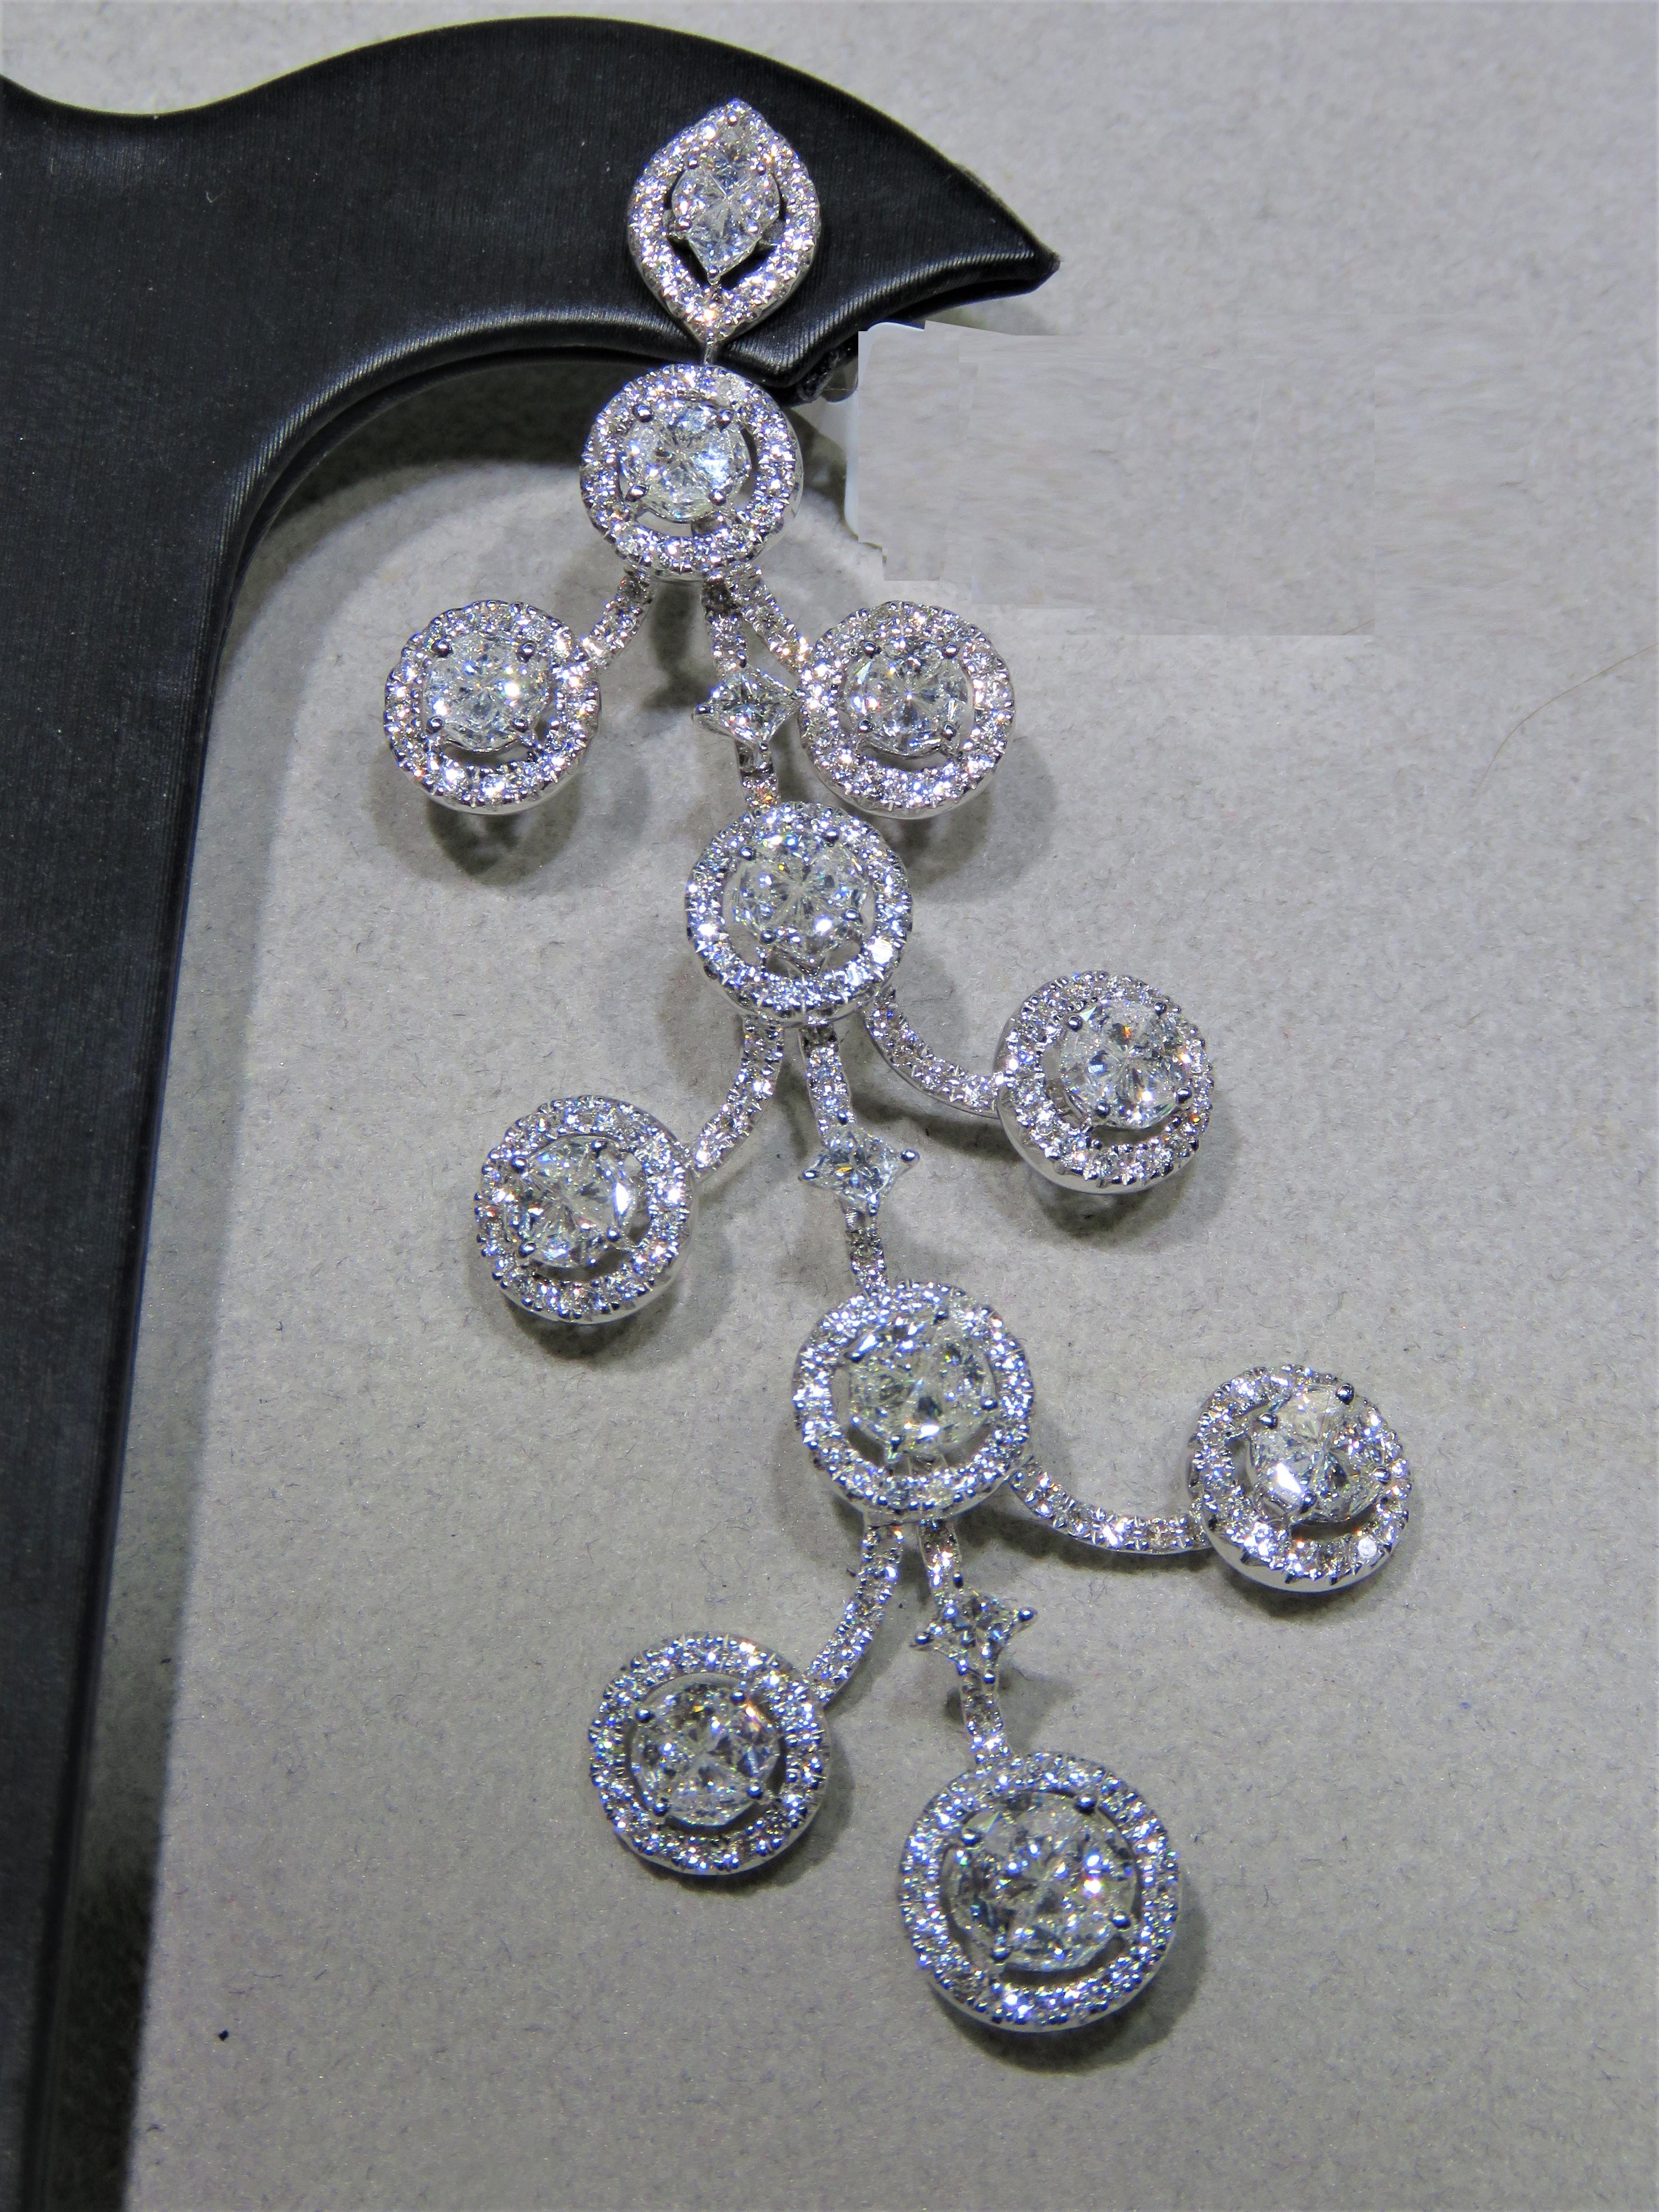 The Following Item we are offering are these Extremely Rare Beautiful 18KT Gold Fine Large White Diamond Dangle Earrings. Each Earring features Rare Gorgeous Glittering Fancy Tiers of Large Sparkling White Diamonds!! T.C.W. Approx 10.50CTS!!! The